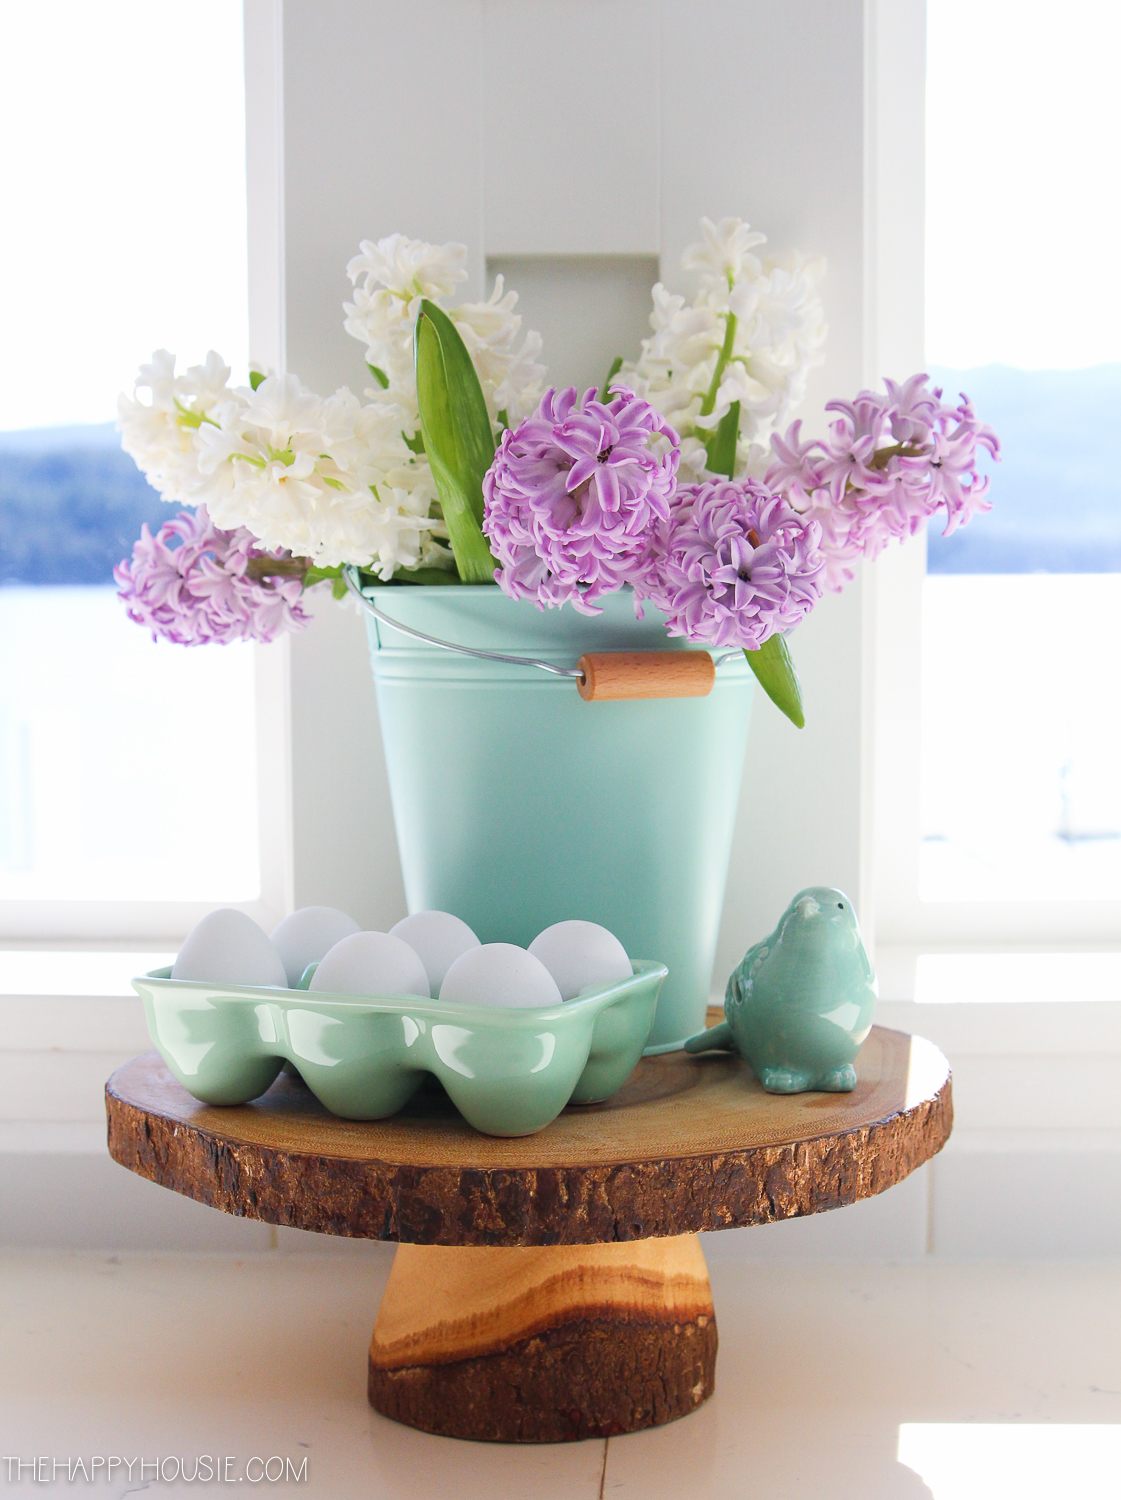 A pretty vignette on the wooden cake stand.